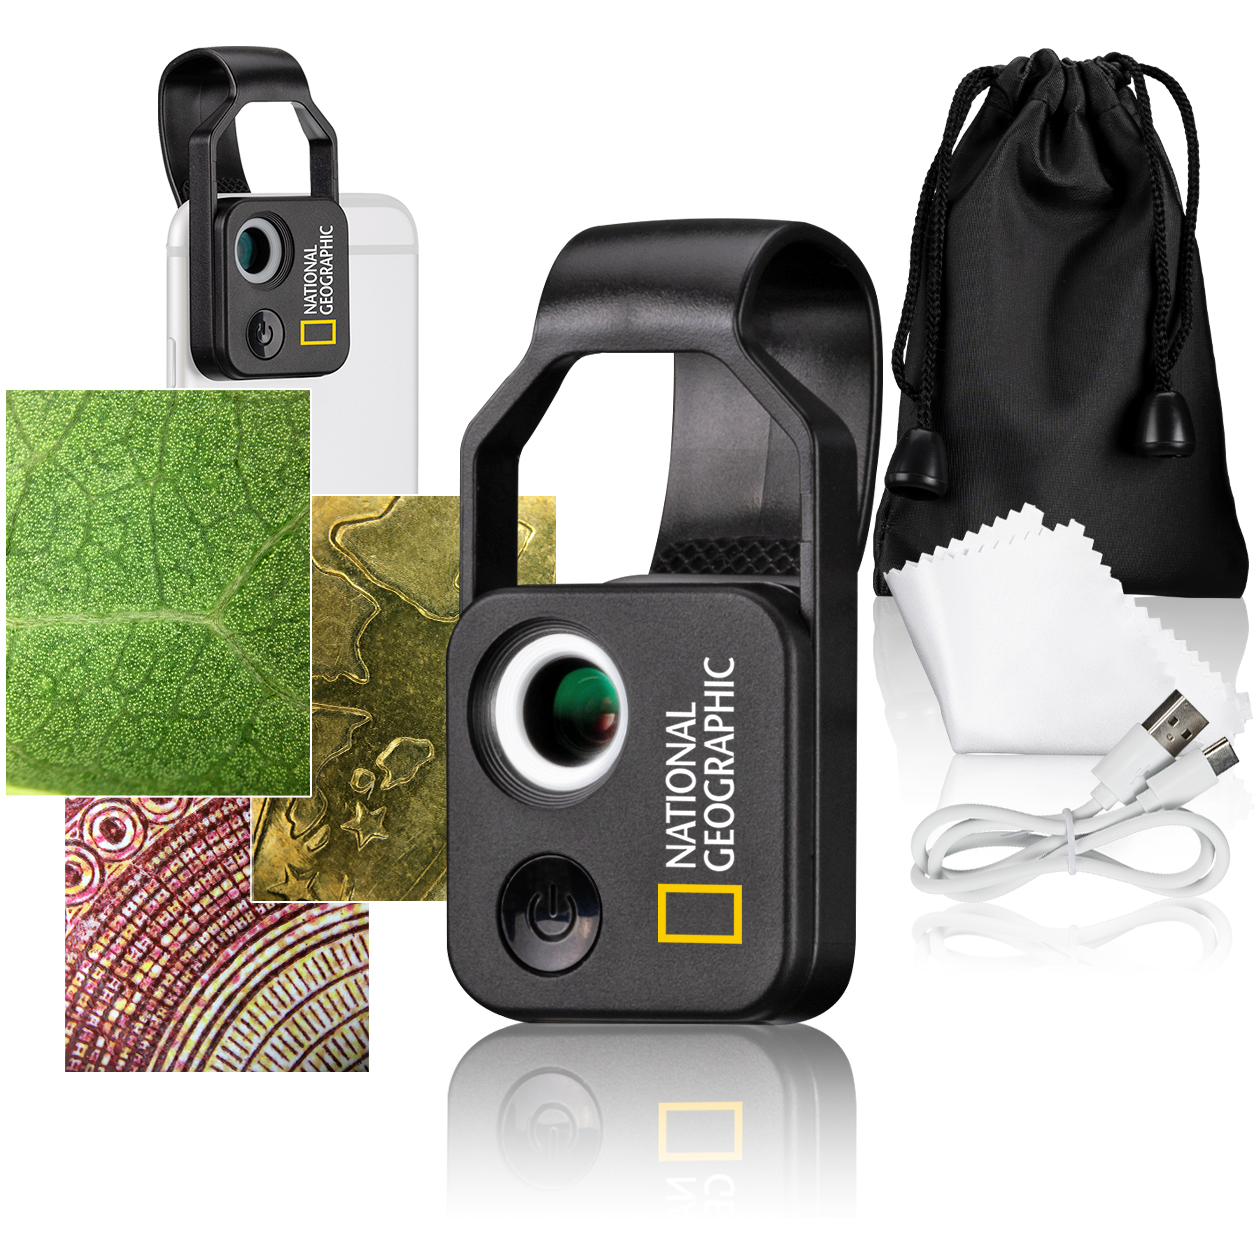 NATIONAL GEOGRAPHIC 200x Smartphone Microscope with CPL